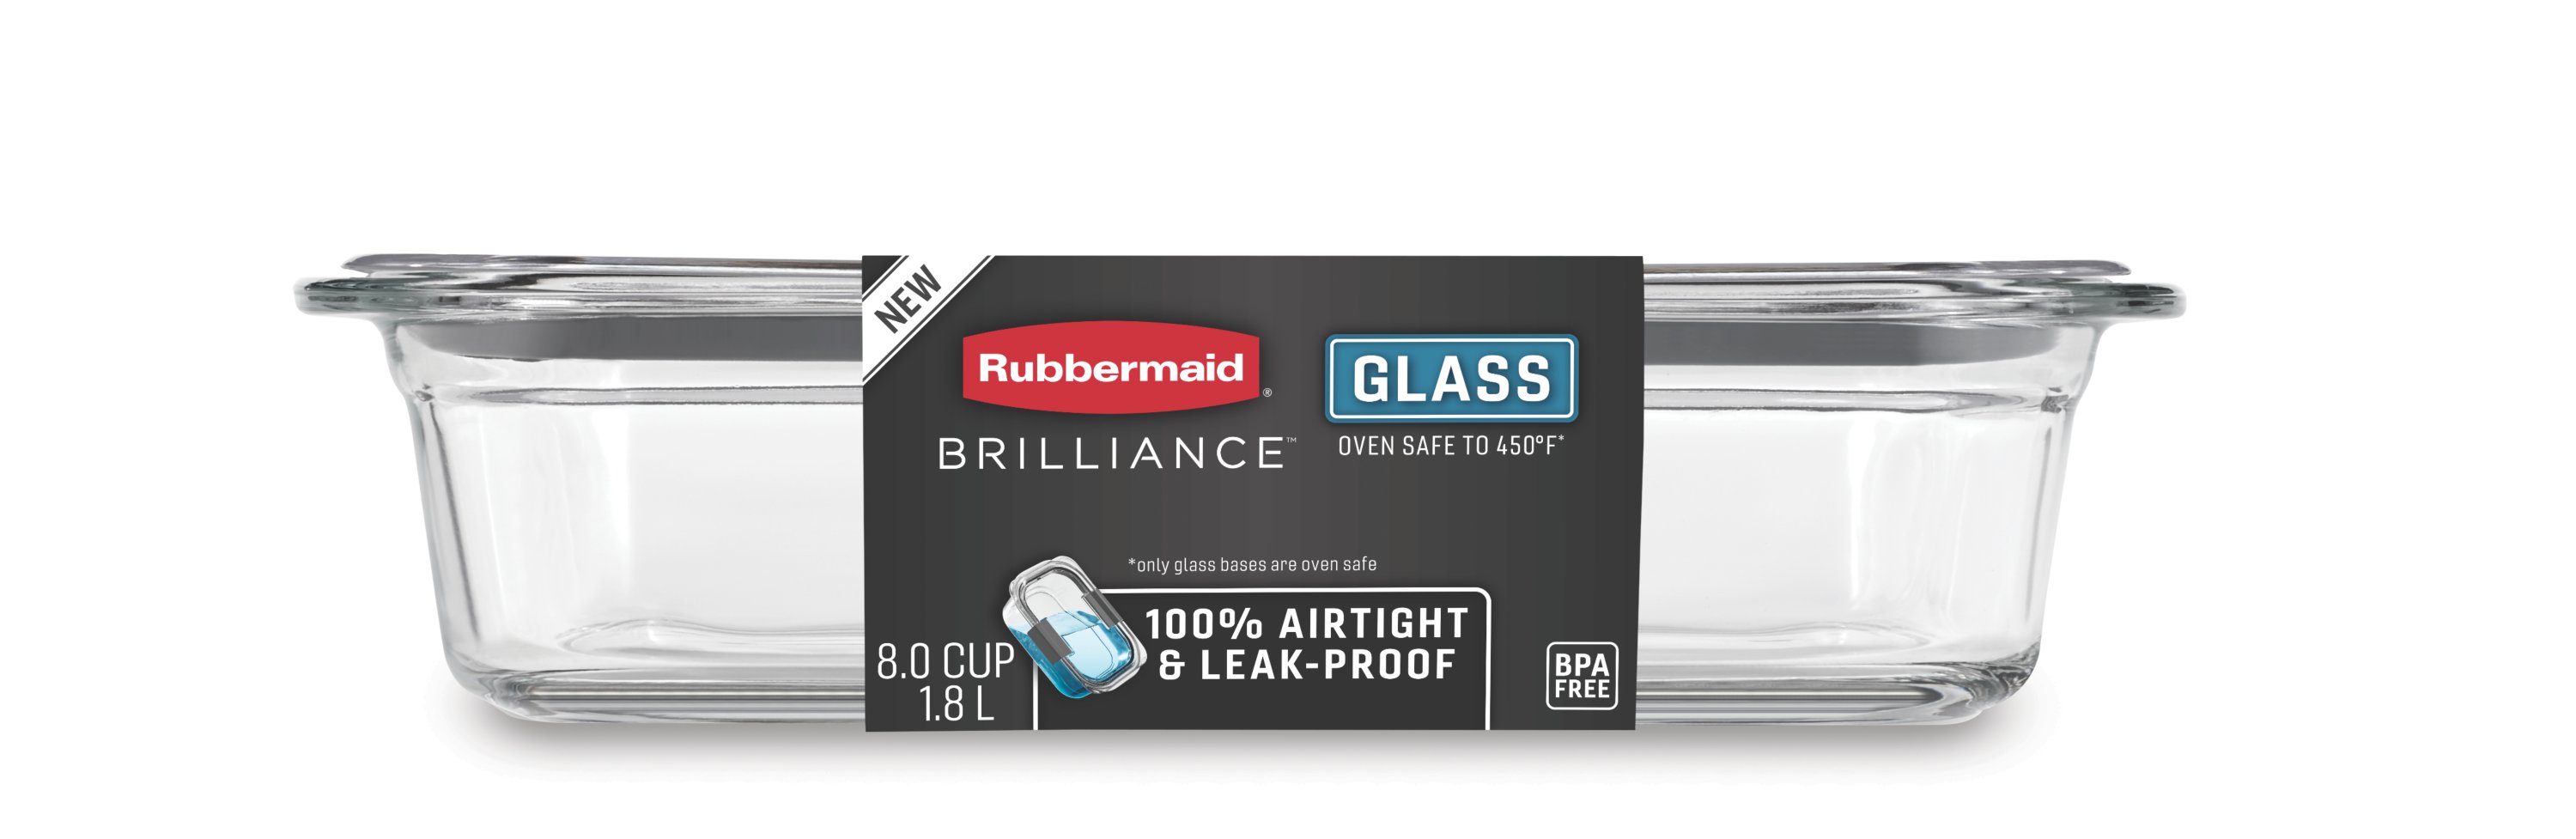 https://s7d9.scene7.com/is/image/NewellRubbermaid/2118314-rubbermaid-food-storage-brilliance-glass-clear-8c-in-pack-straight-on